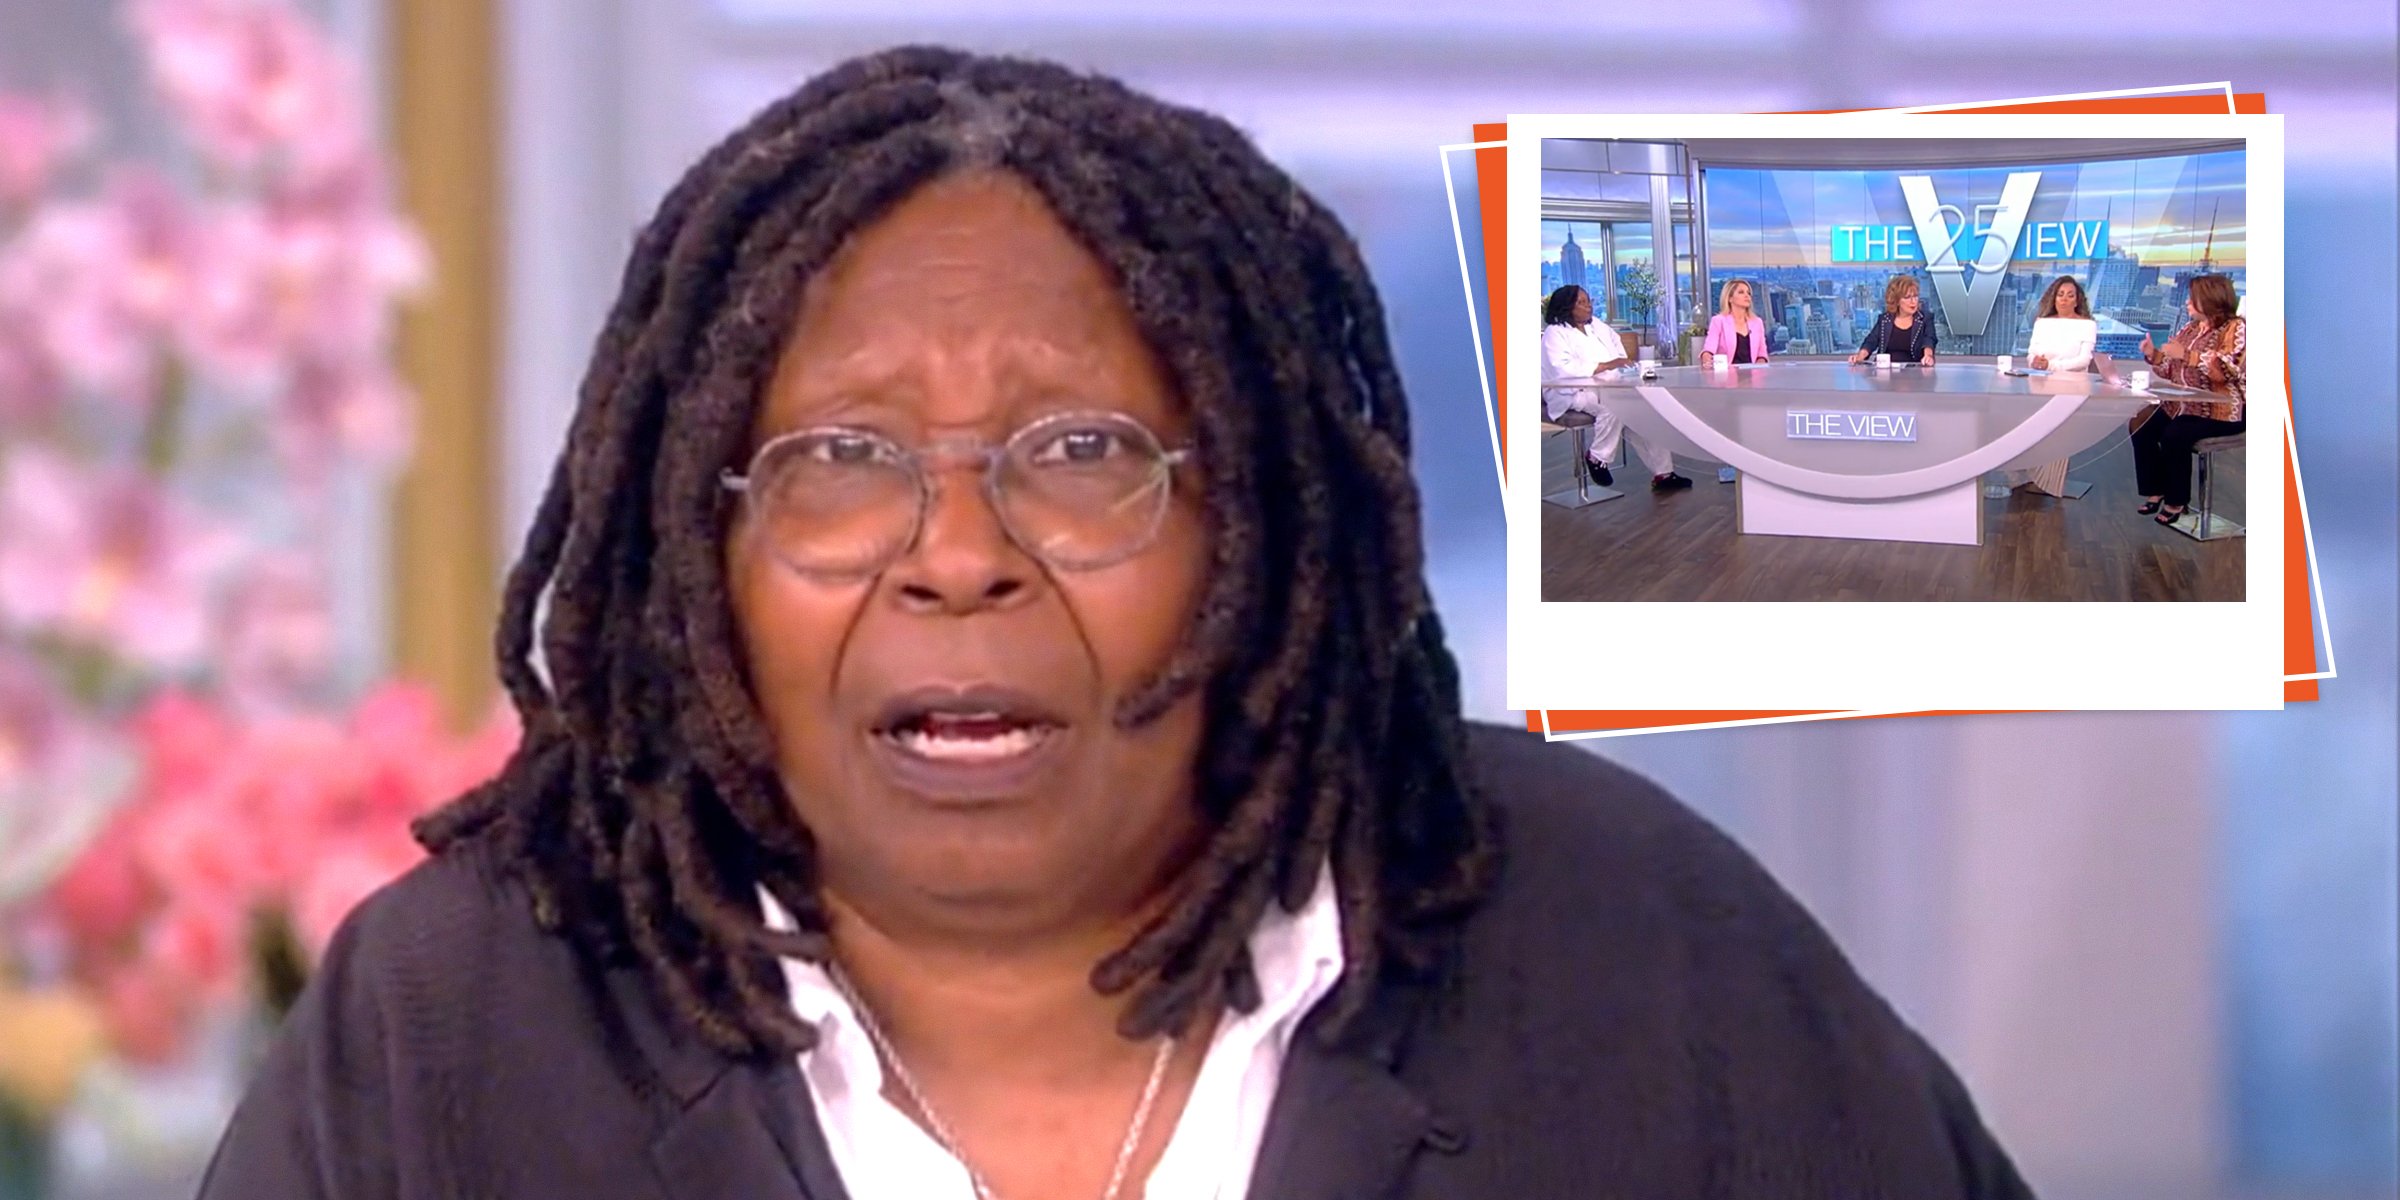 Whoopi Goldberg | TV Show 'The View' | Source: Twitter.com/TheView